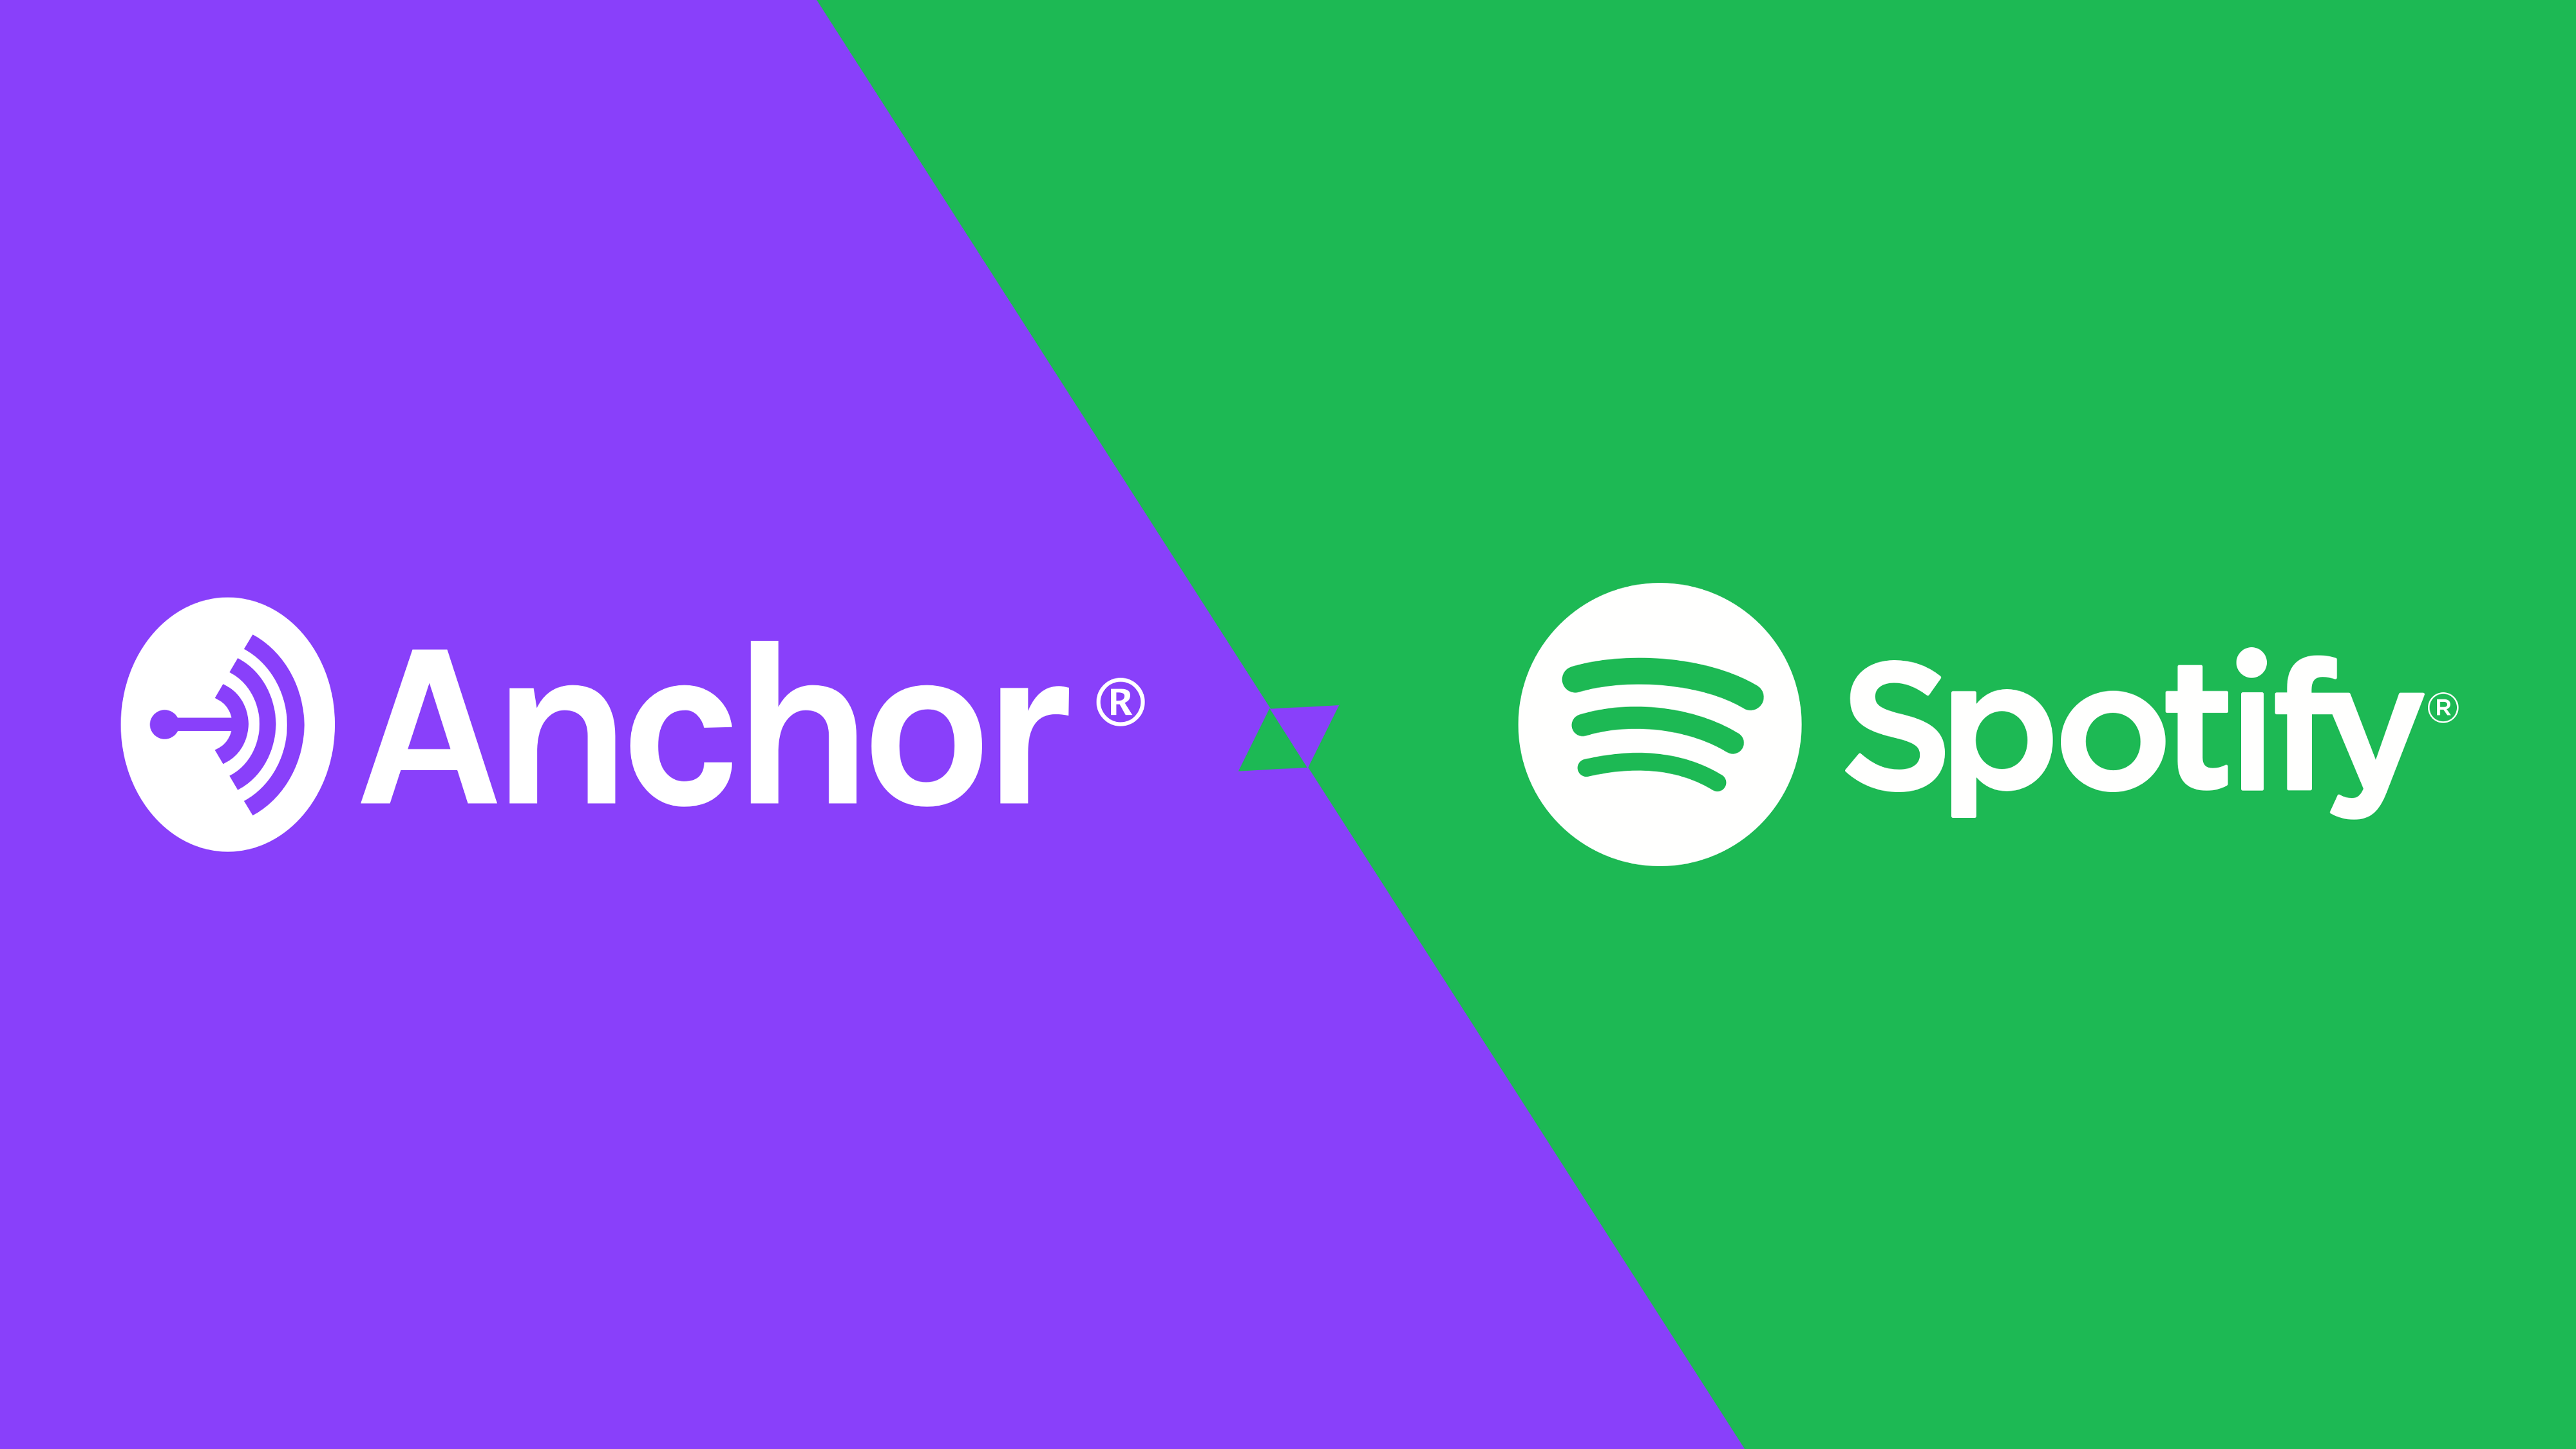 Spotify and Anchor put their foot down on stolen podcasts